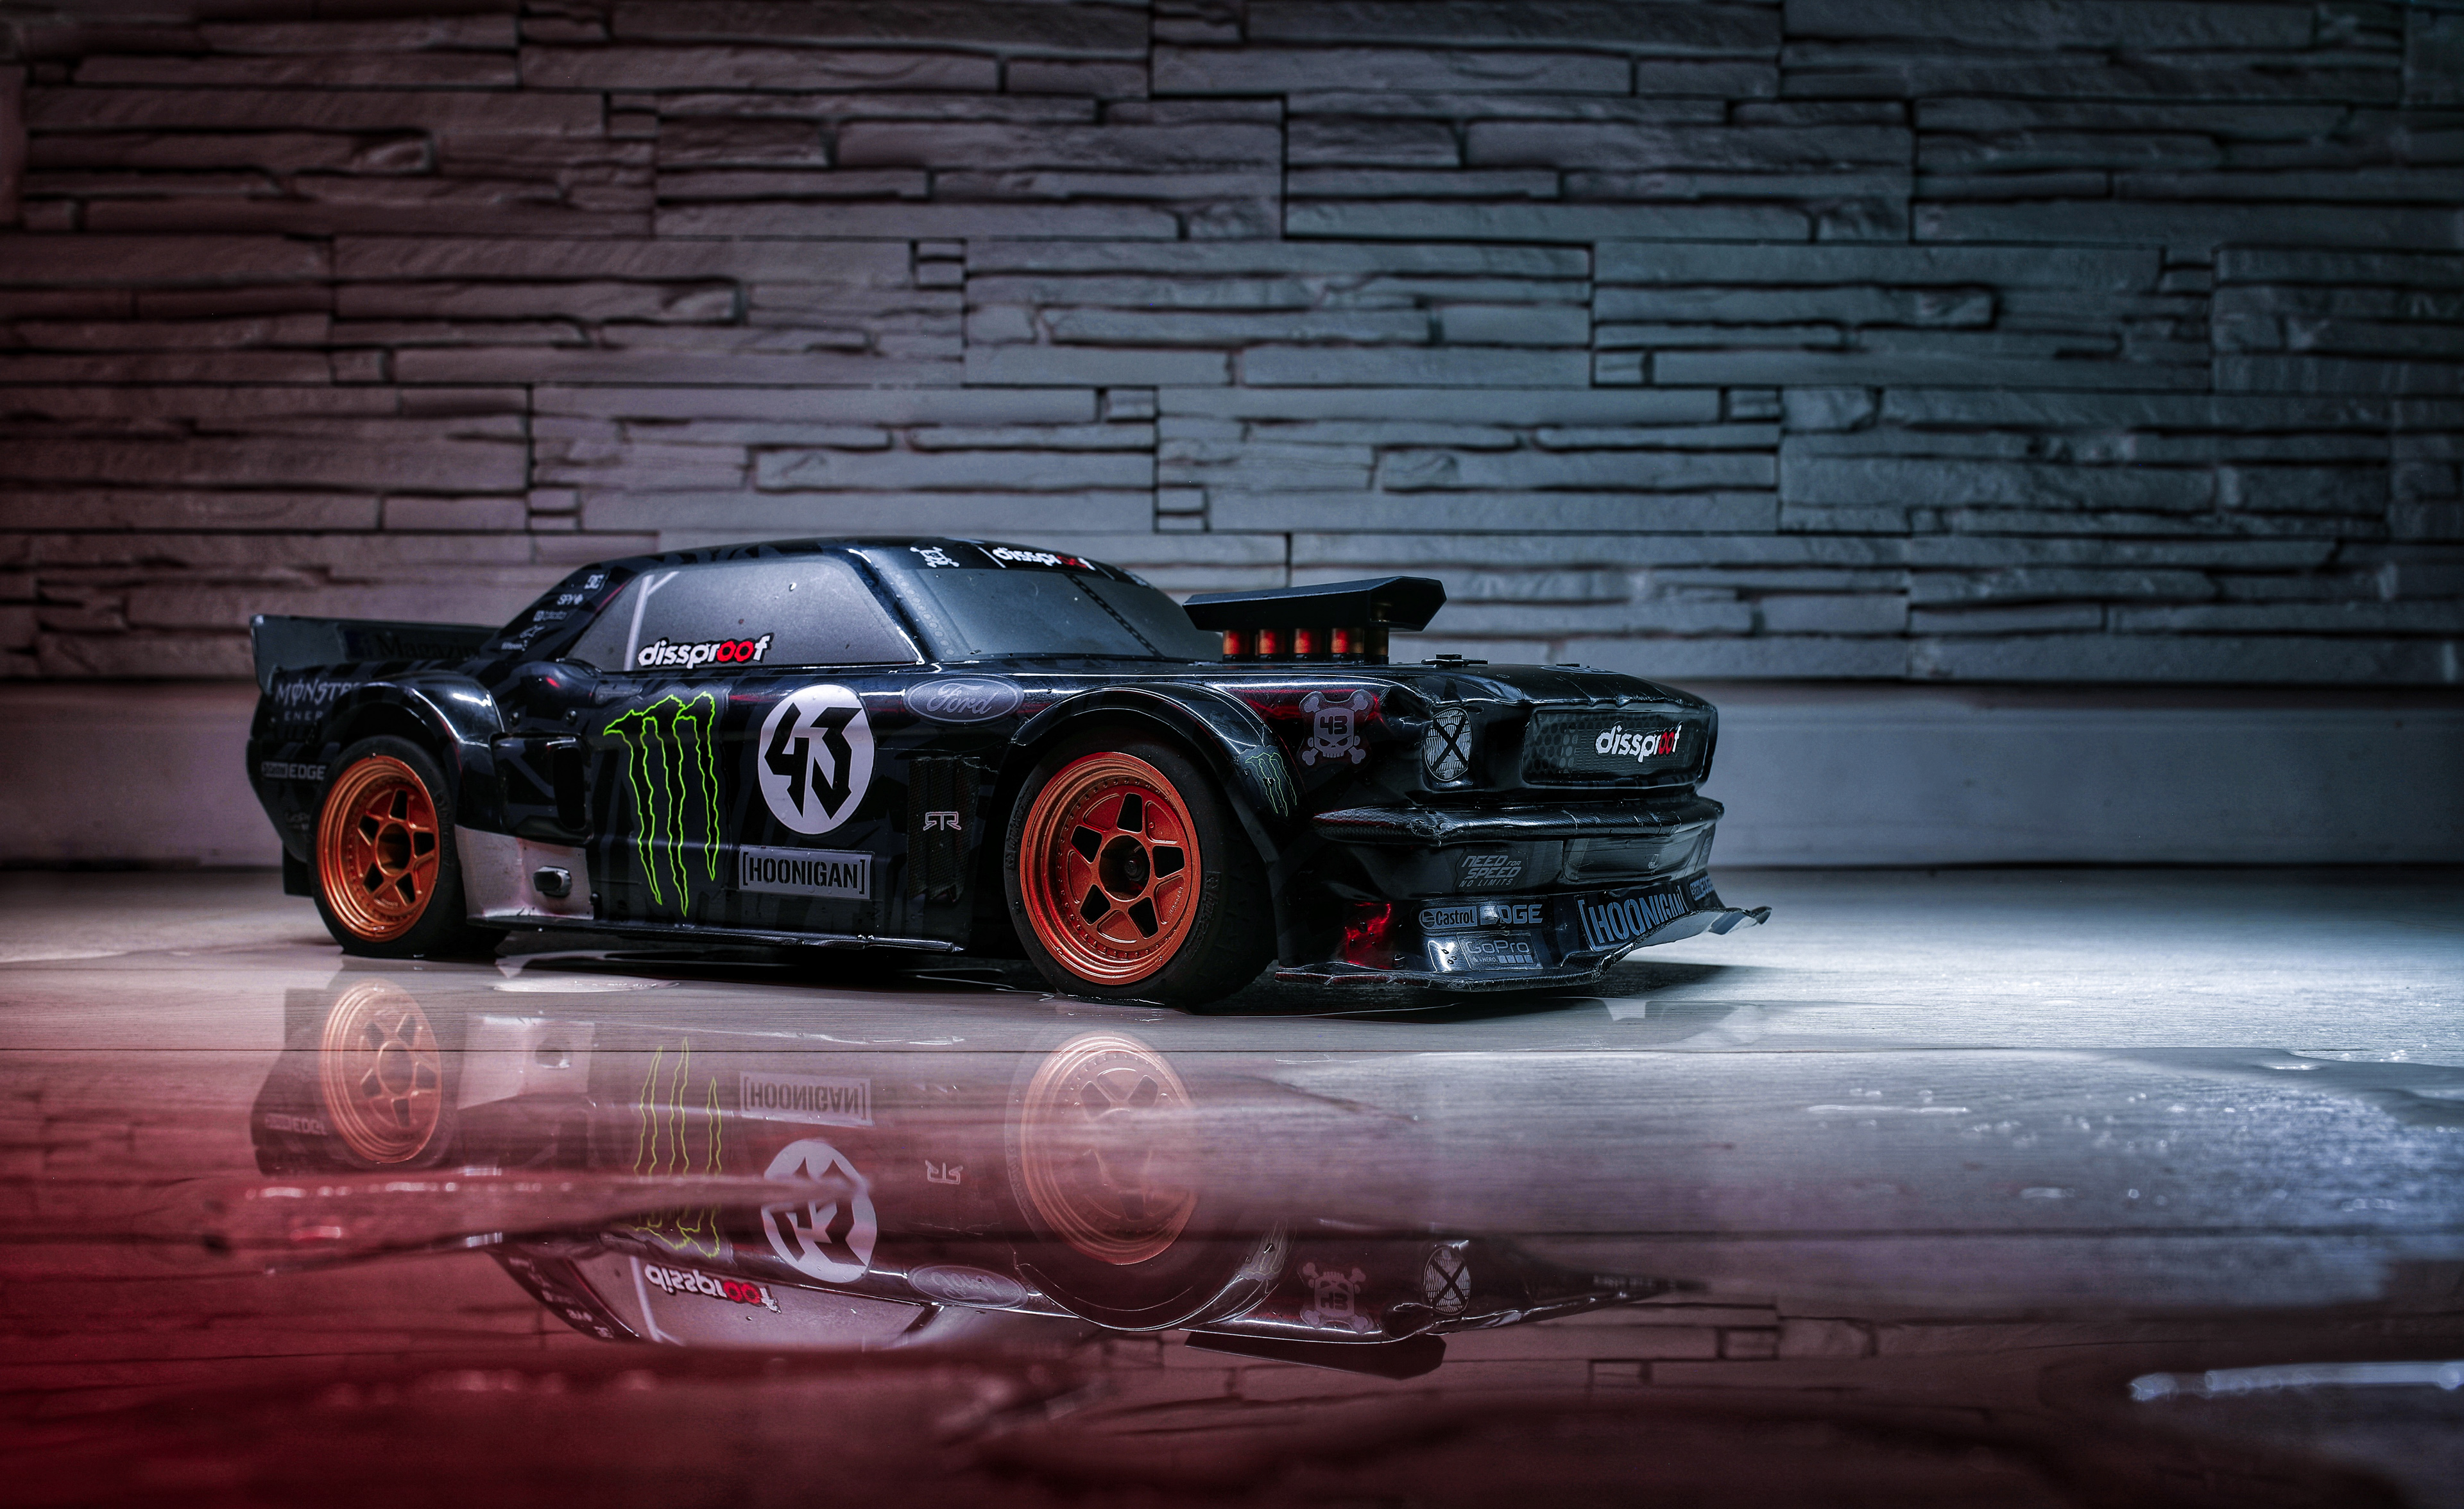 Free photo Drift-ready Ford Mustang in unusual tuning